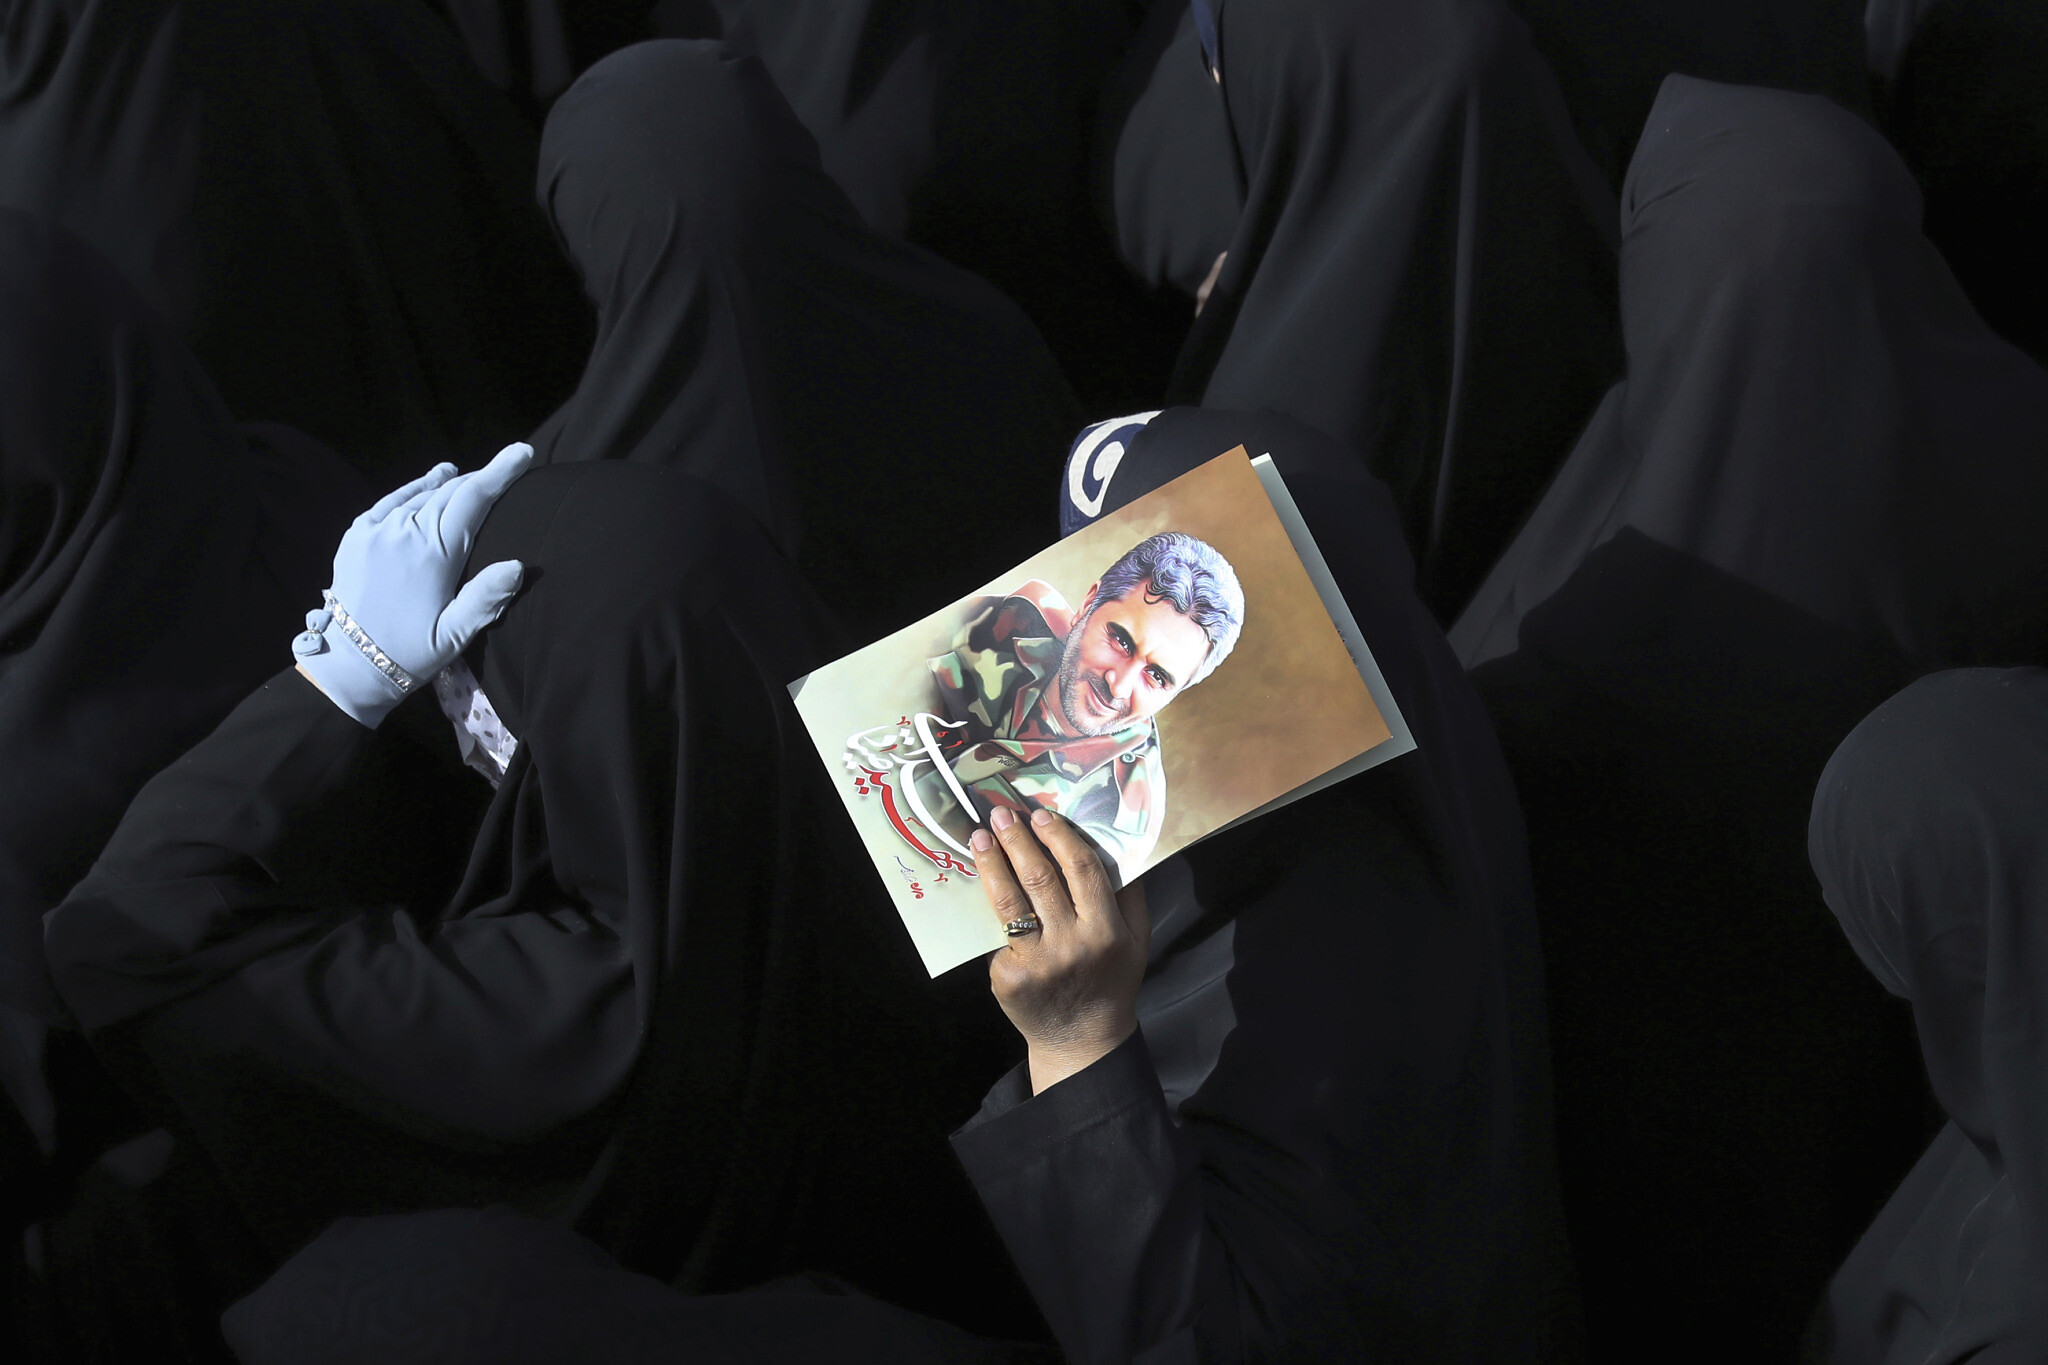 Mourners attend the funeral ceremony of Iran’s Revolutionary Guard Col. Hassan Sayyad Khodaei, shown in the poster, who was killed on Sunday, in Tehran, Iran, May 24, 2022. (Vahid Salemi/AP)